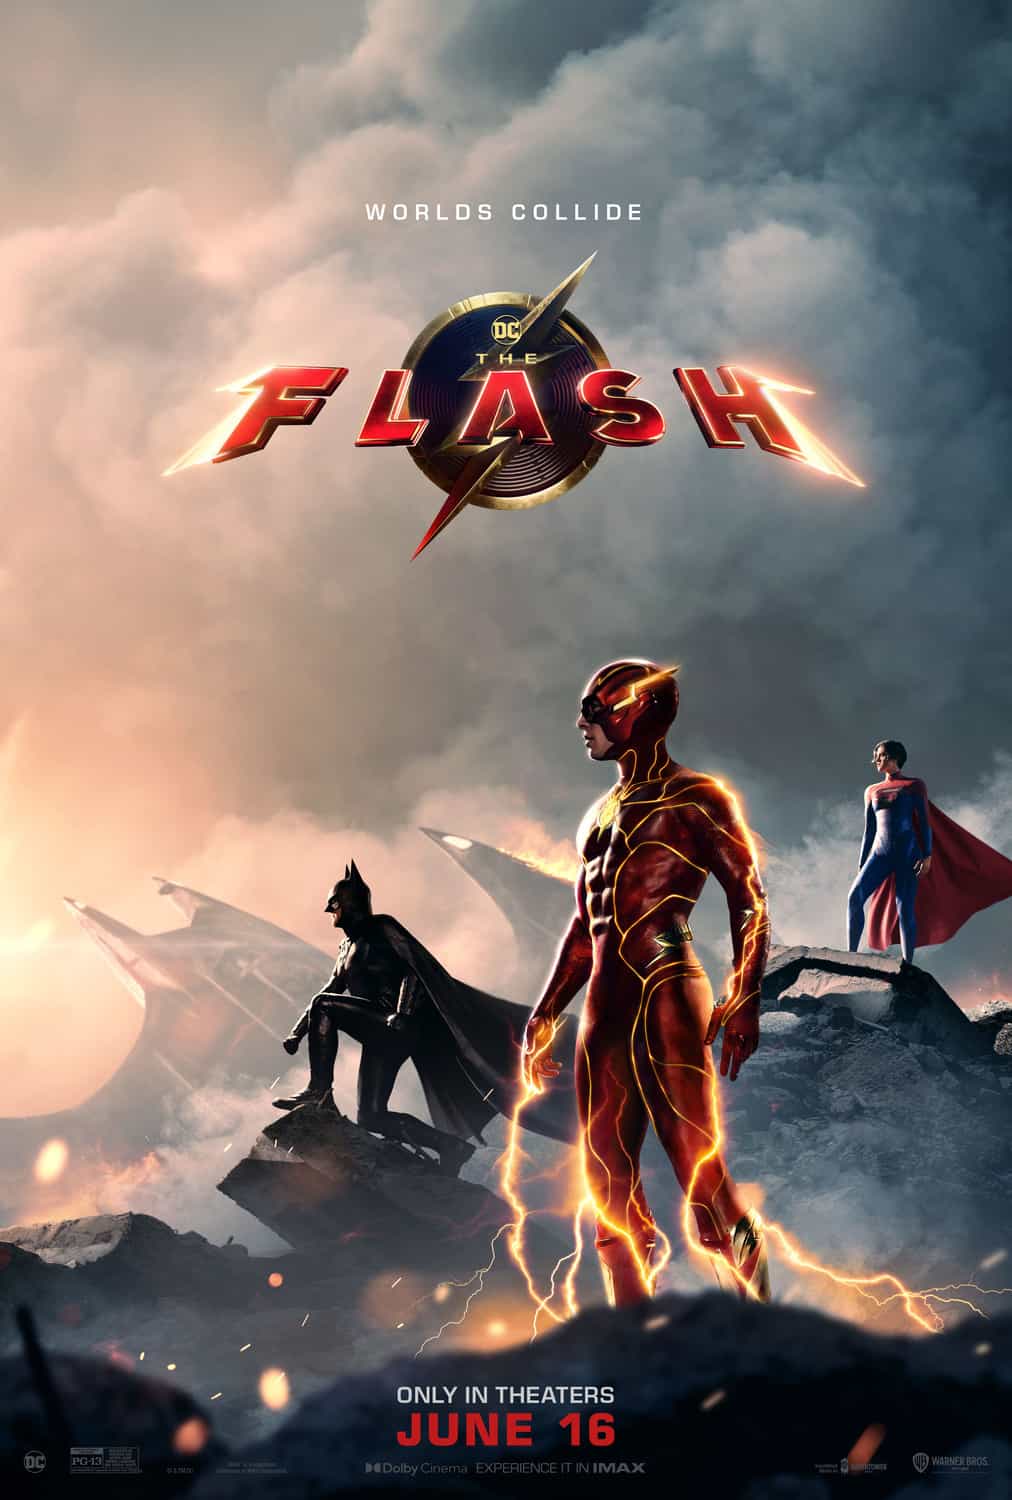 Check out the new trailer and poster for upcoming movie The Flash which stars Ezra Miller and Ben Affleck - movie UK release date 16th June 2023 #theflash